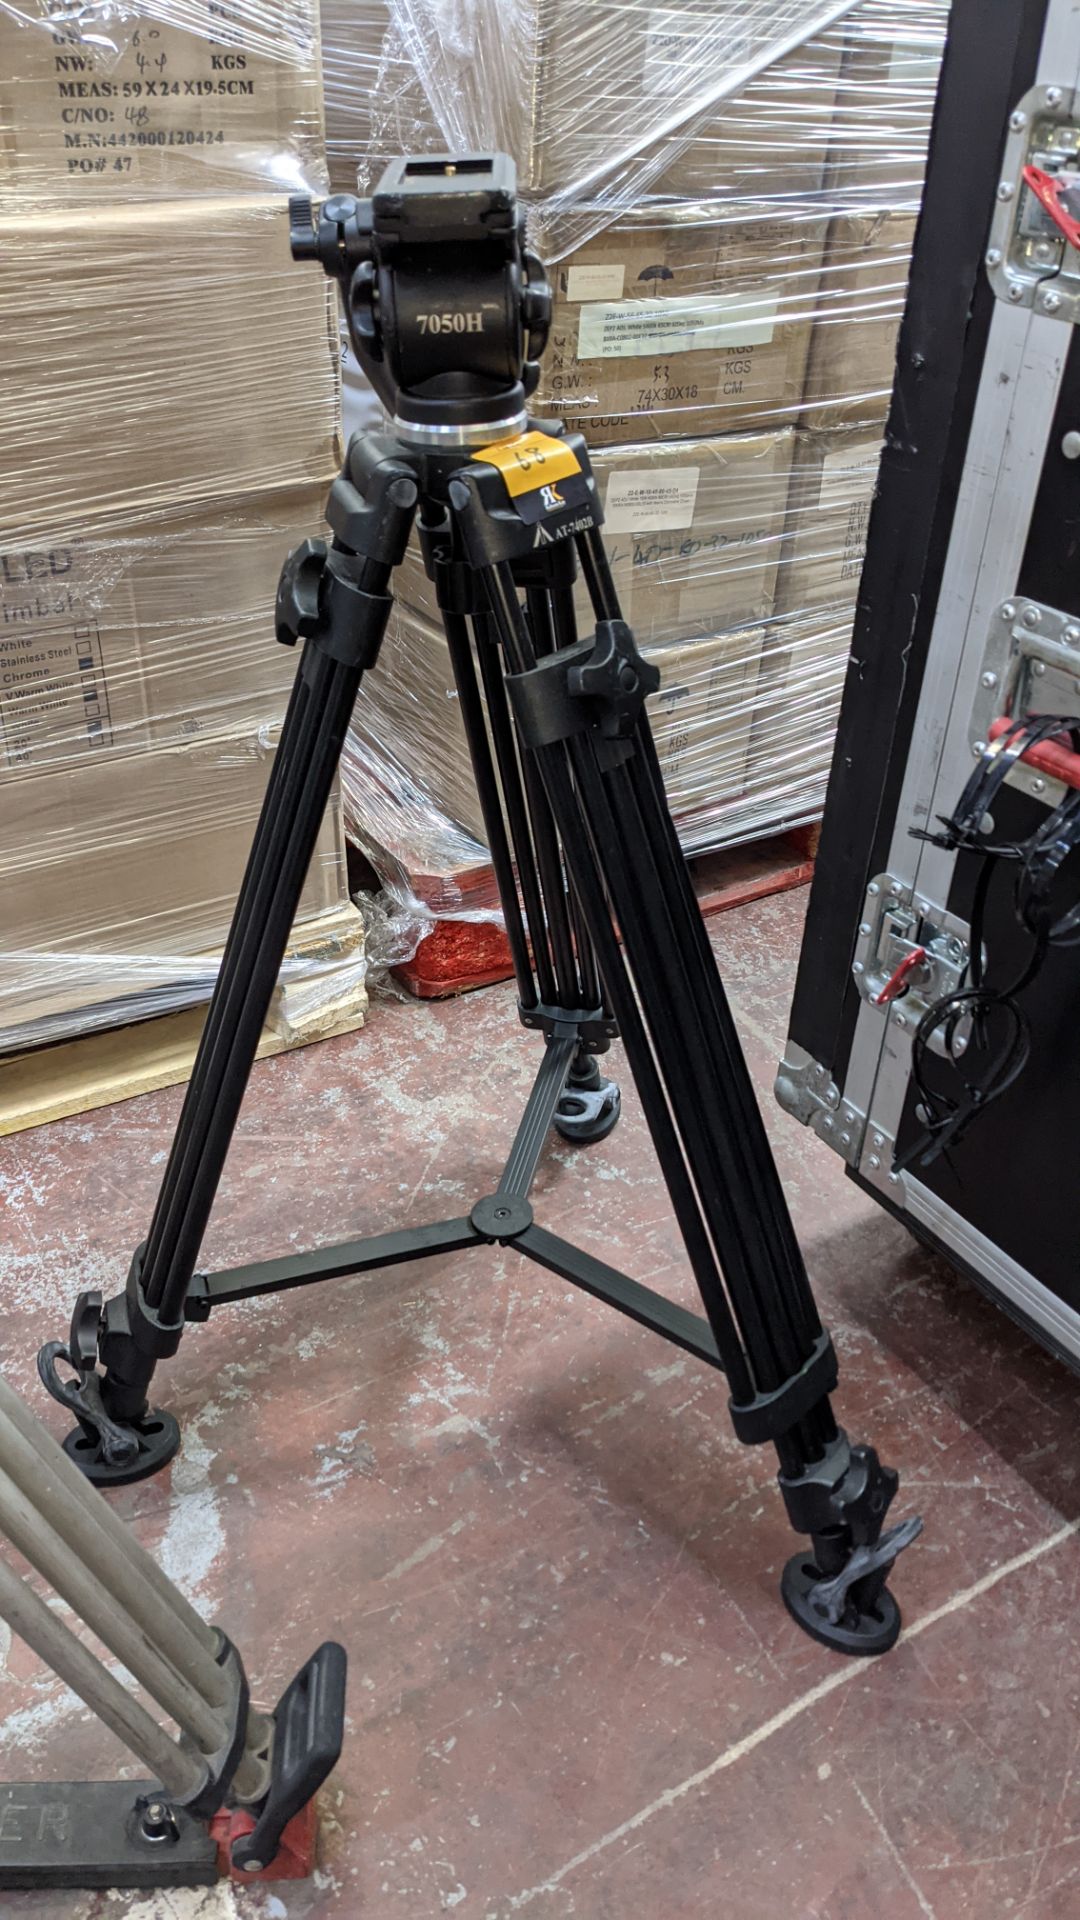 E-Image model AT-7402B tripod with 7050H head - Image 4 of 10